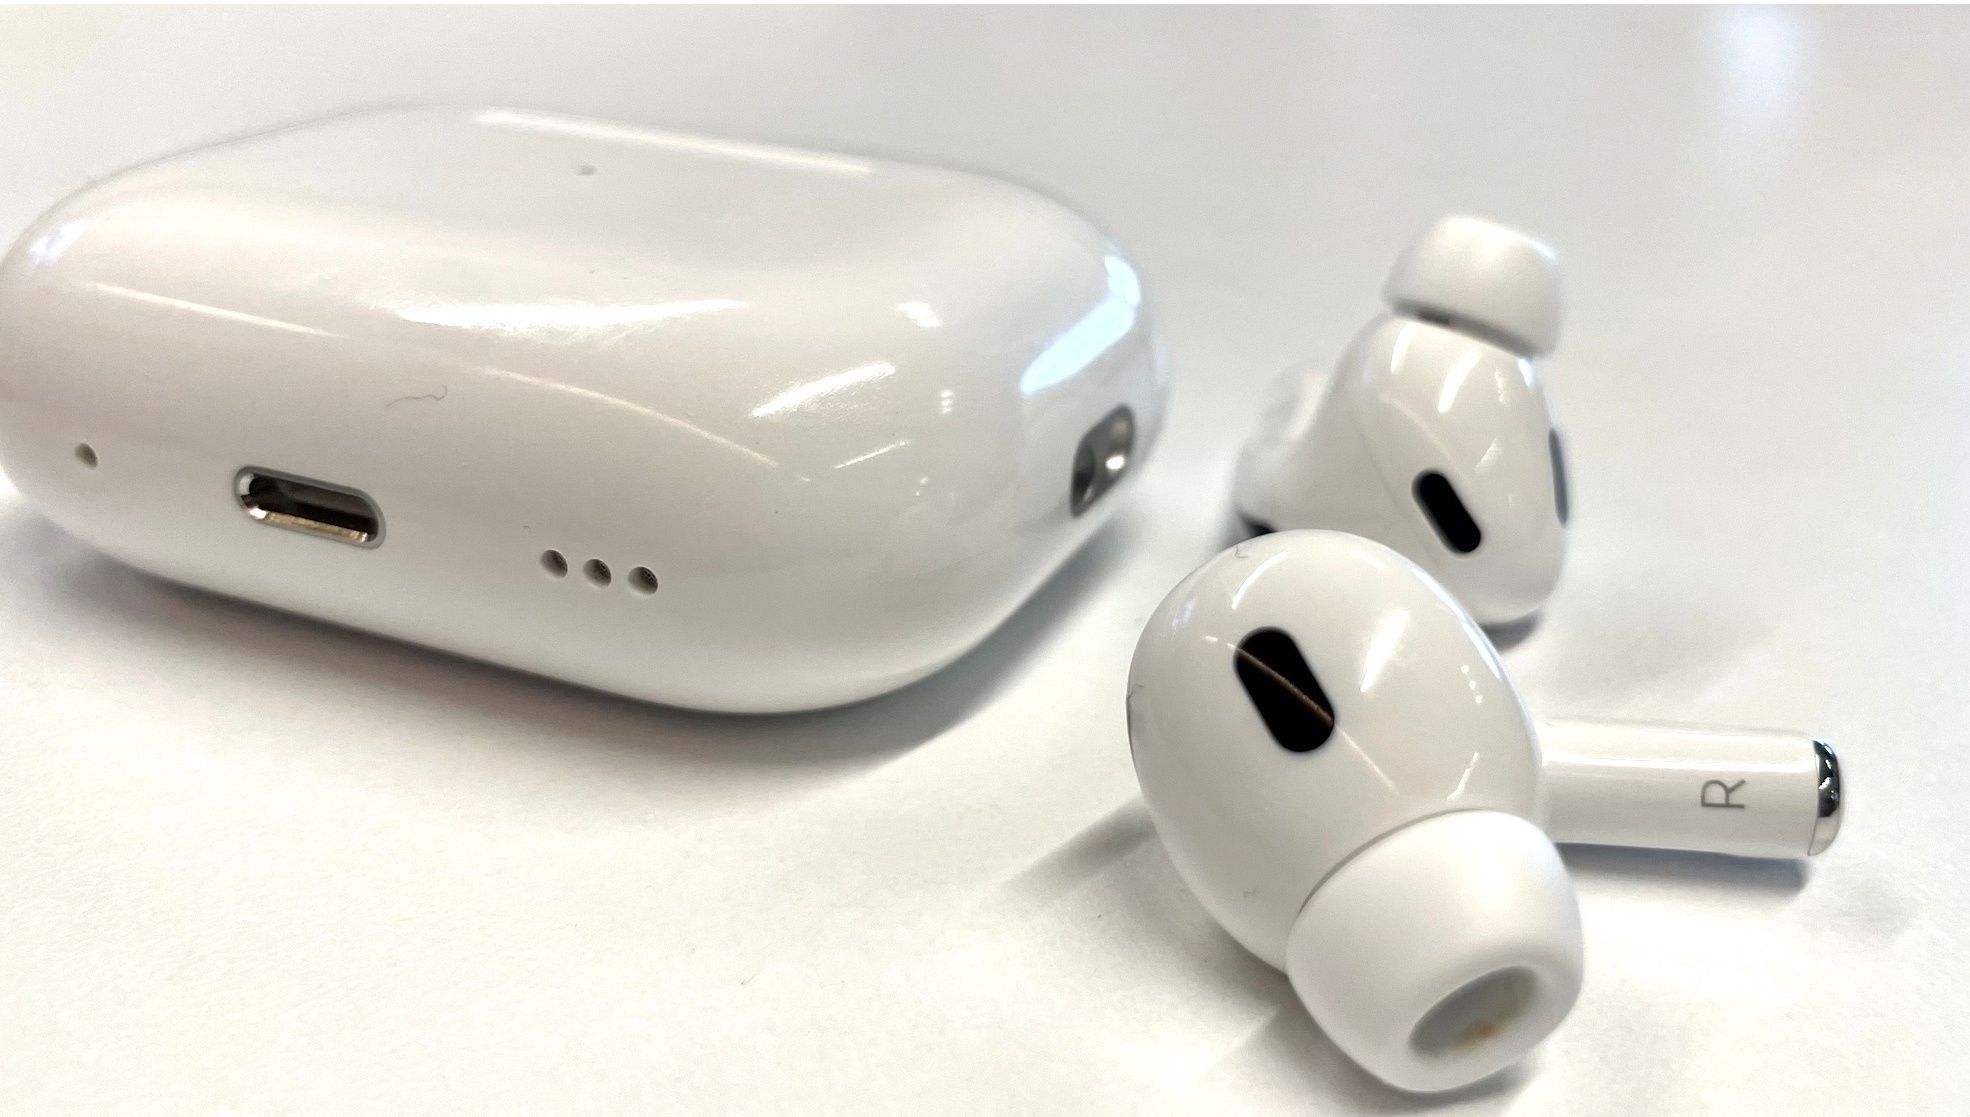 AirPods pro. AirPods Max. AirPods 3.Эйрподс. Айрподс